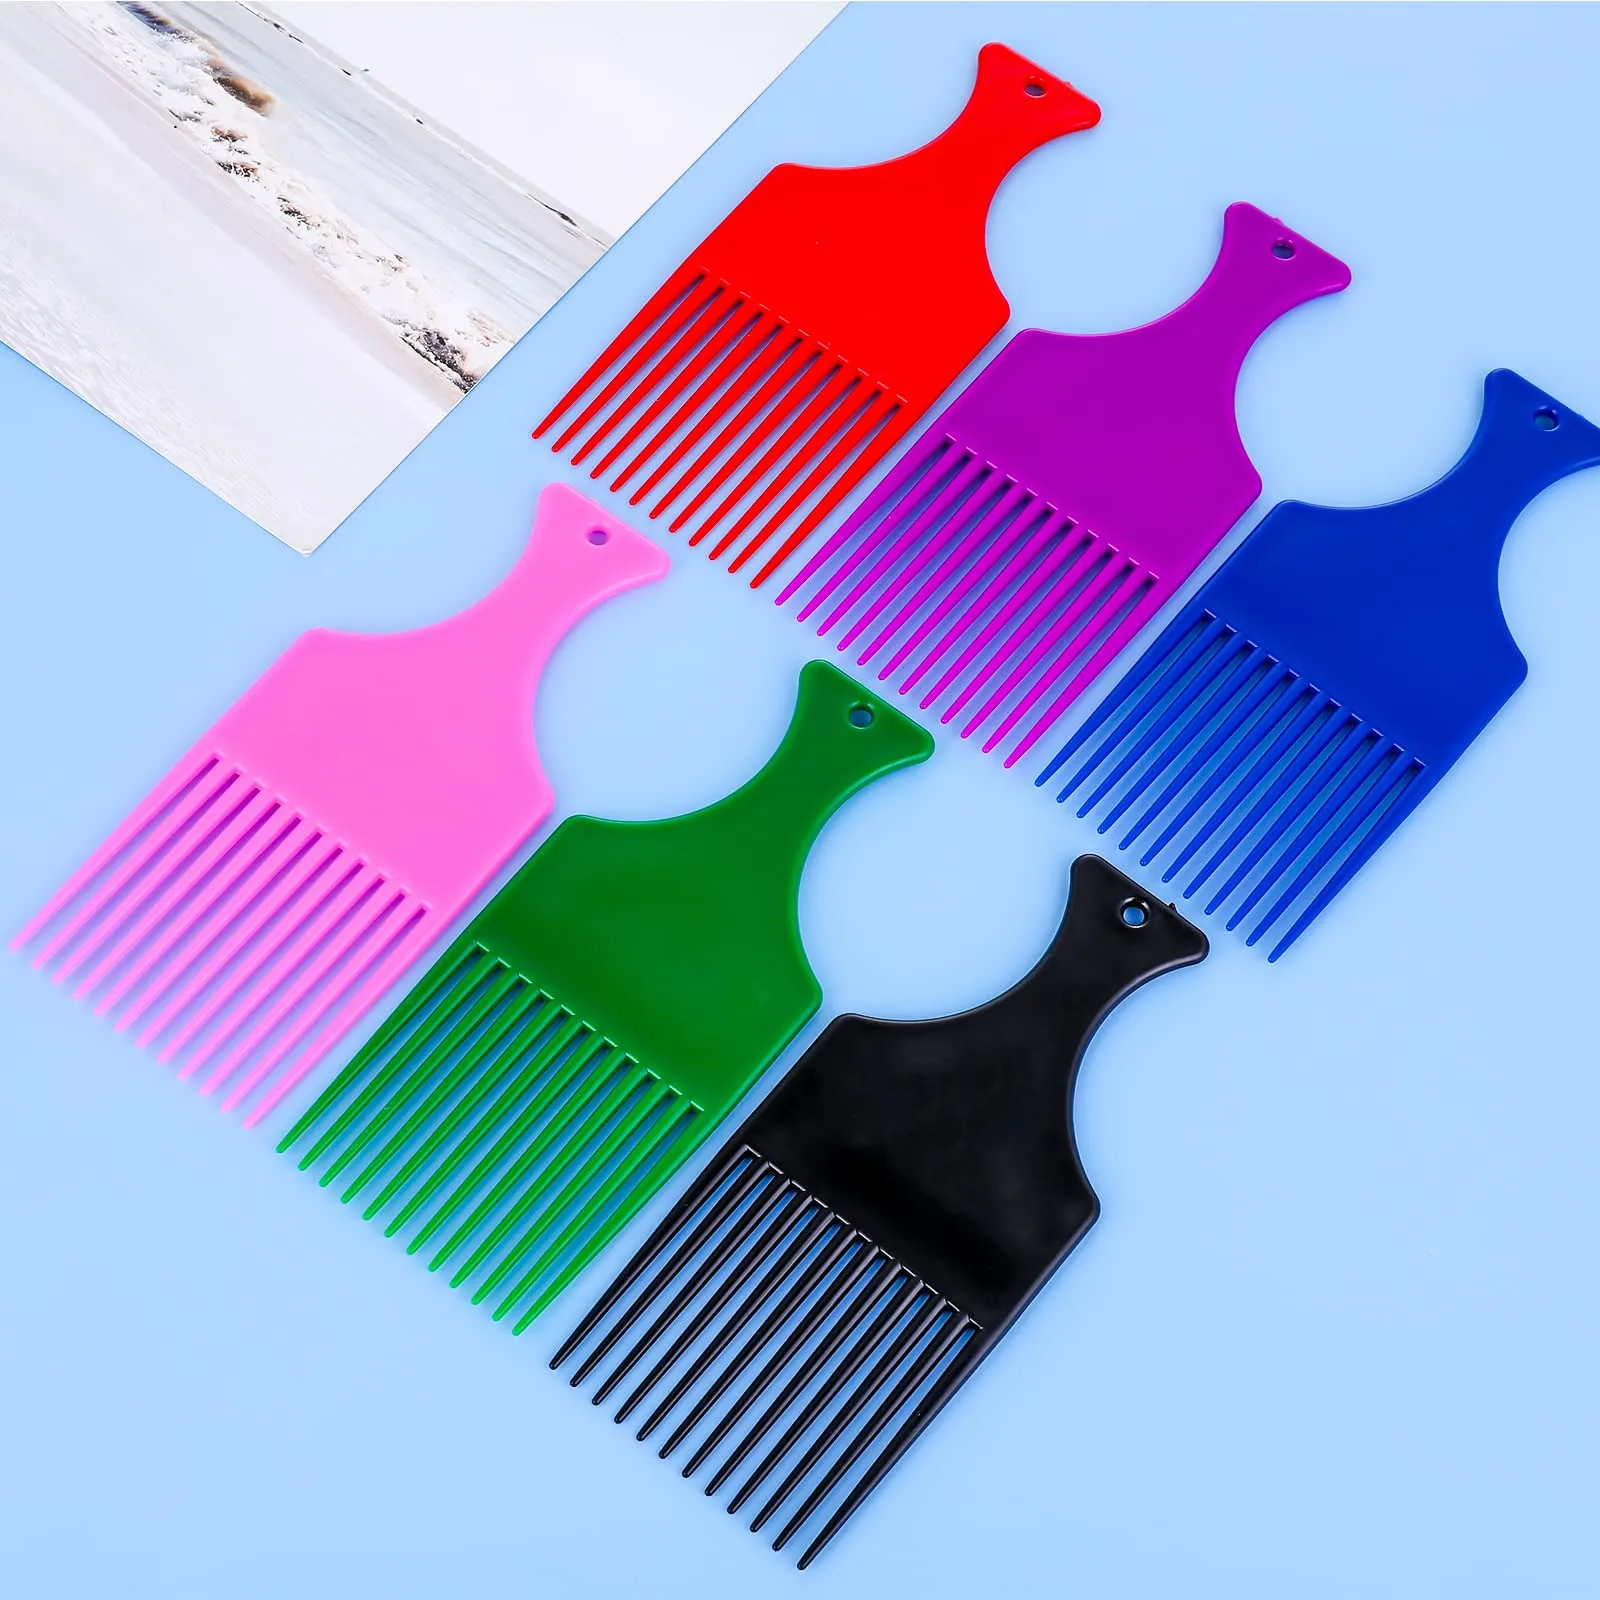 afro pick hair comb smooth hair pick comb plastic wide tooth hair pick comb hairdressing styling tool for natural curly hair style